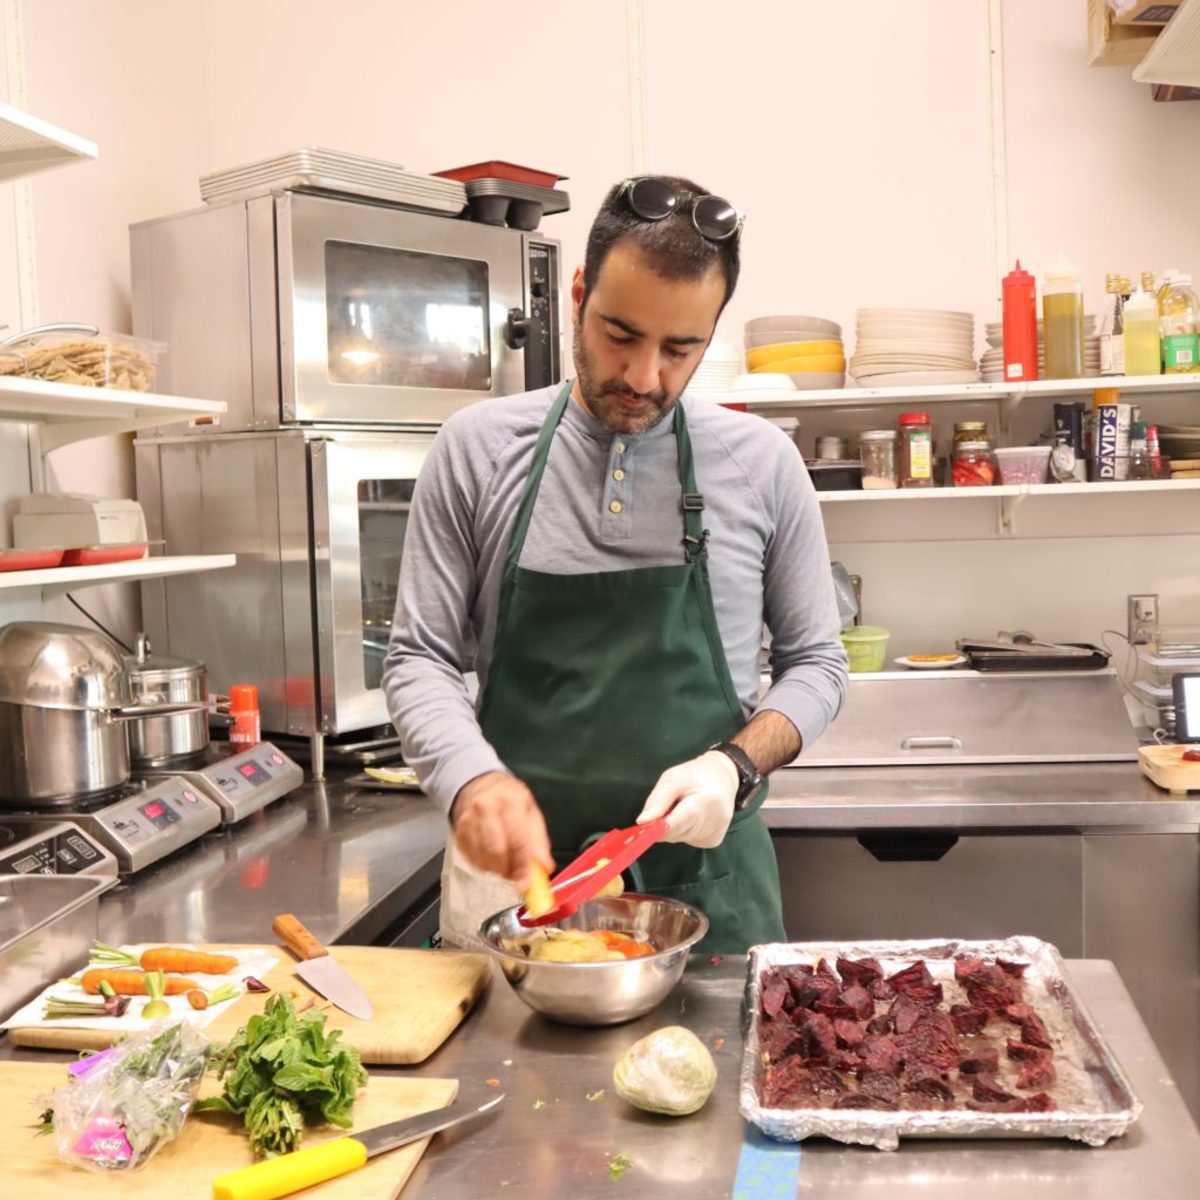 Hanif Sadr, cooks northern Iranian food through his catering company and pop-up kitchen. (Carla Pineda)